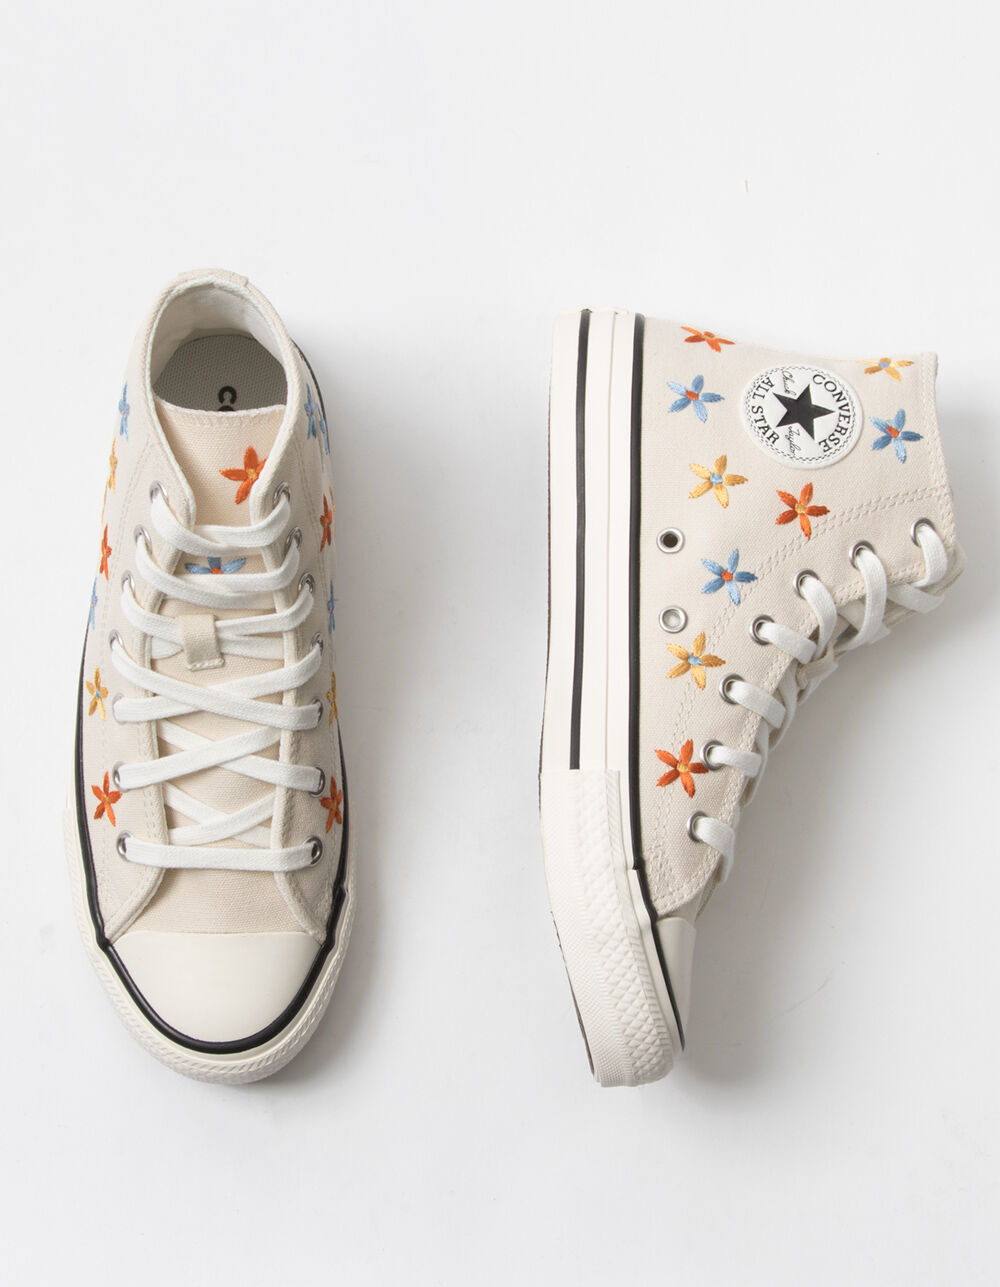 Humilde Pebish Oso polar CONVERSE Spring Flowers Chuck Taylor All Star Girls Shoes - NATURAL | Tillys